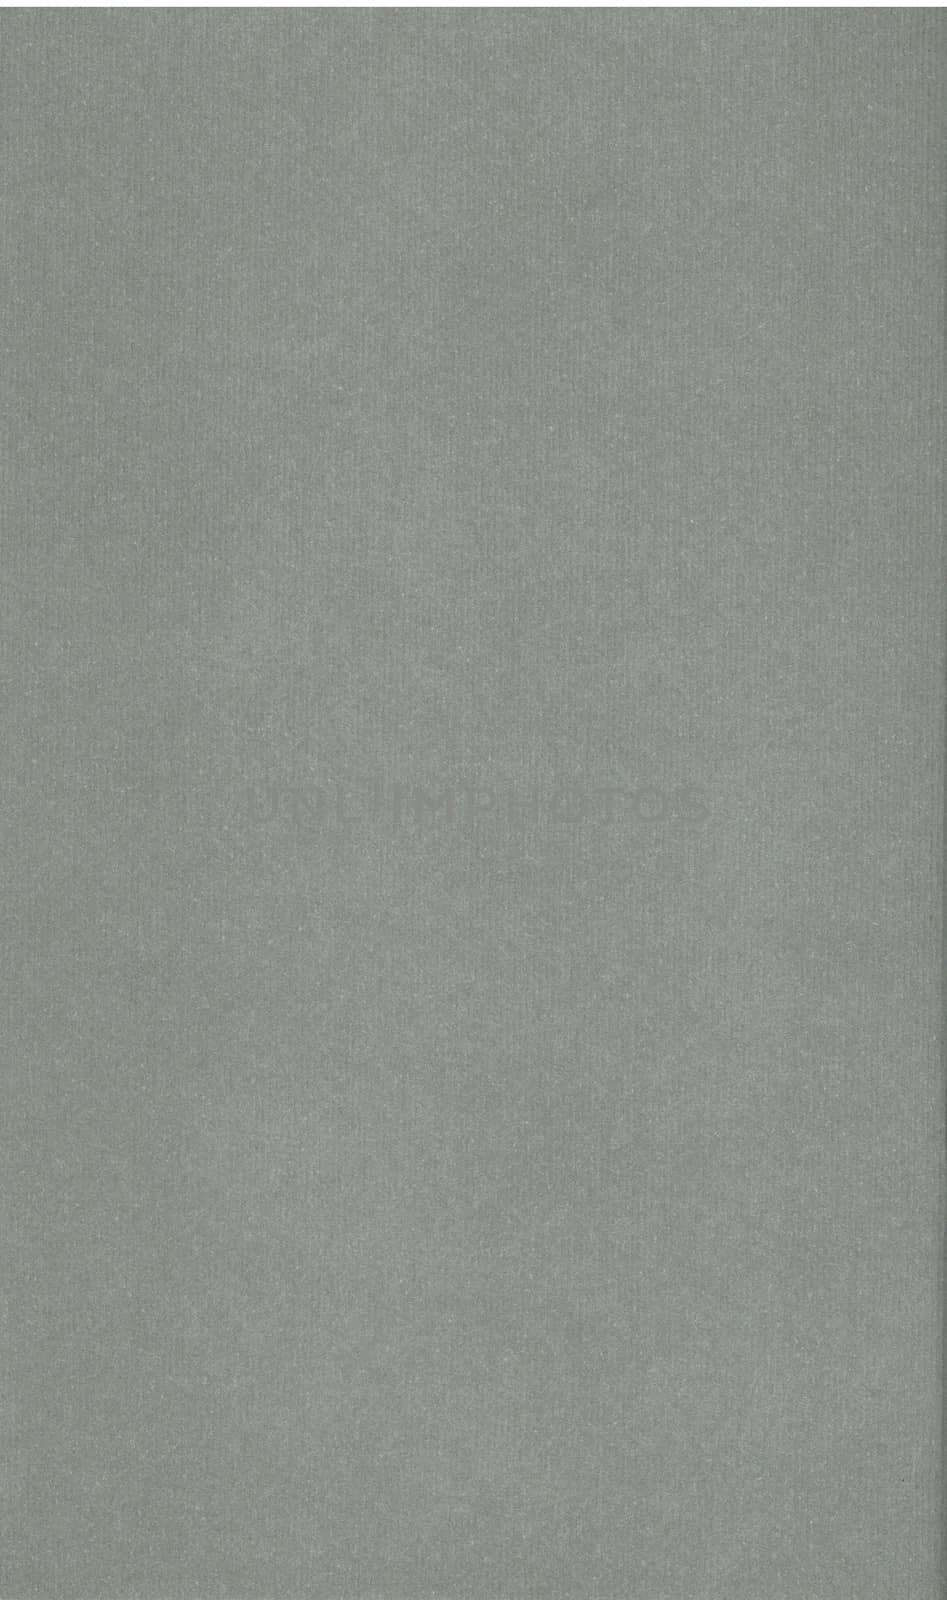 grey paperboard useful as a background